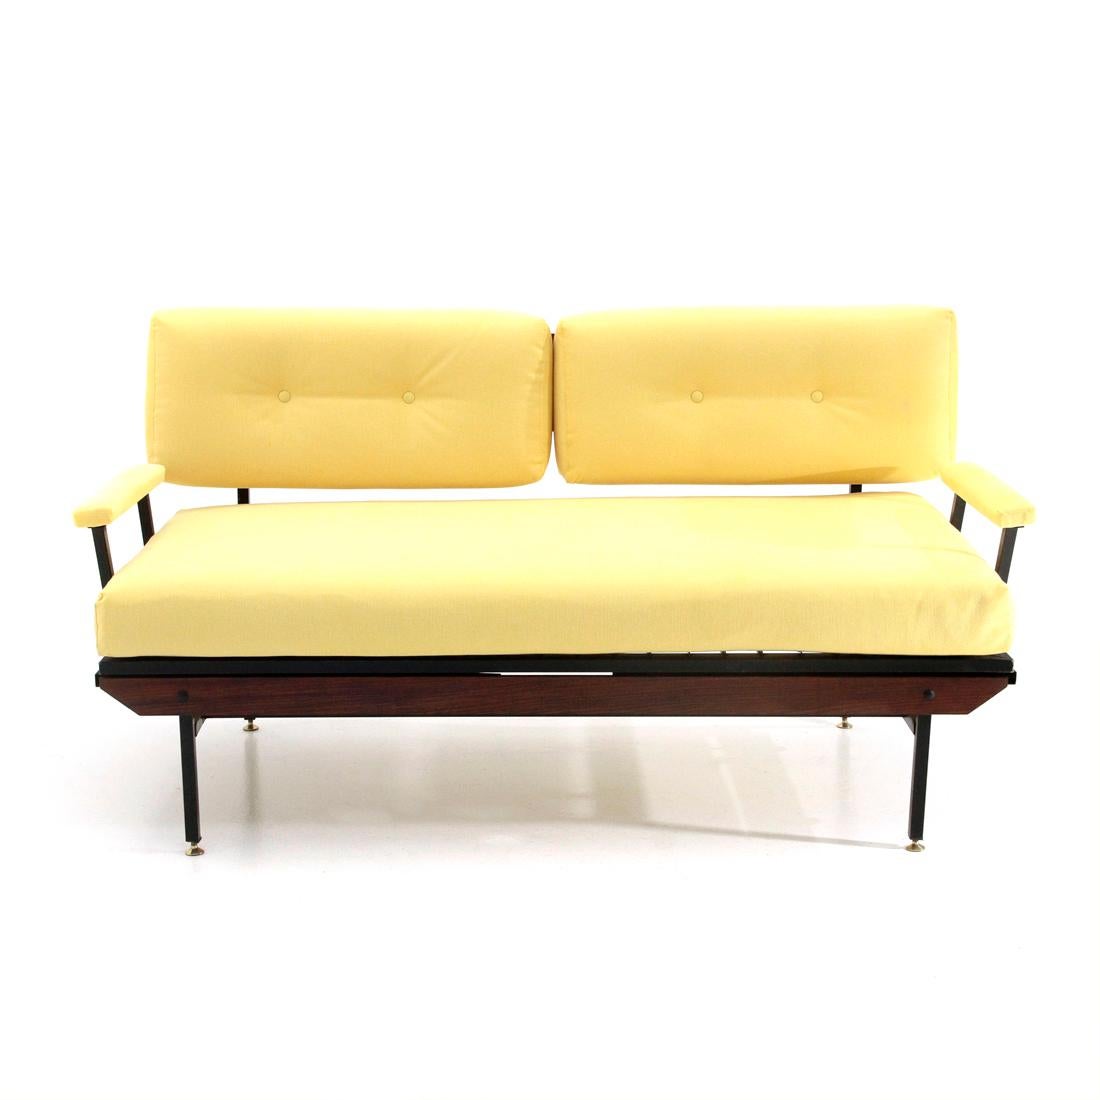 Italian manufacture sofa produced in the 1950s.
Structure in black painted metal.
Schienale formato da tre listelli in legno.
Seat and back cushions padded and lined with new yellow fabric.
Armrests in black metal with padding and yellow